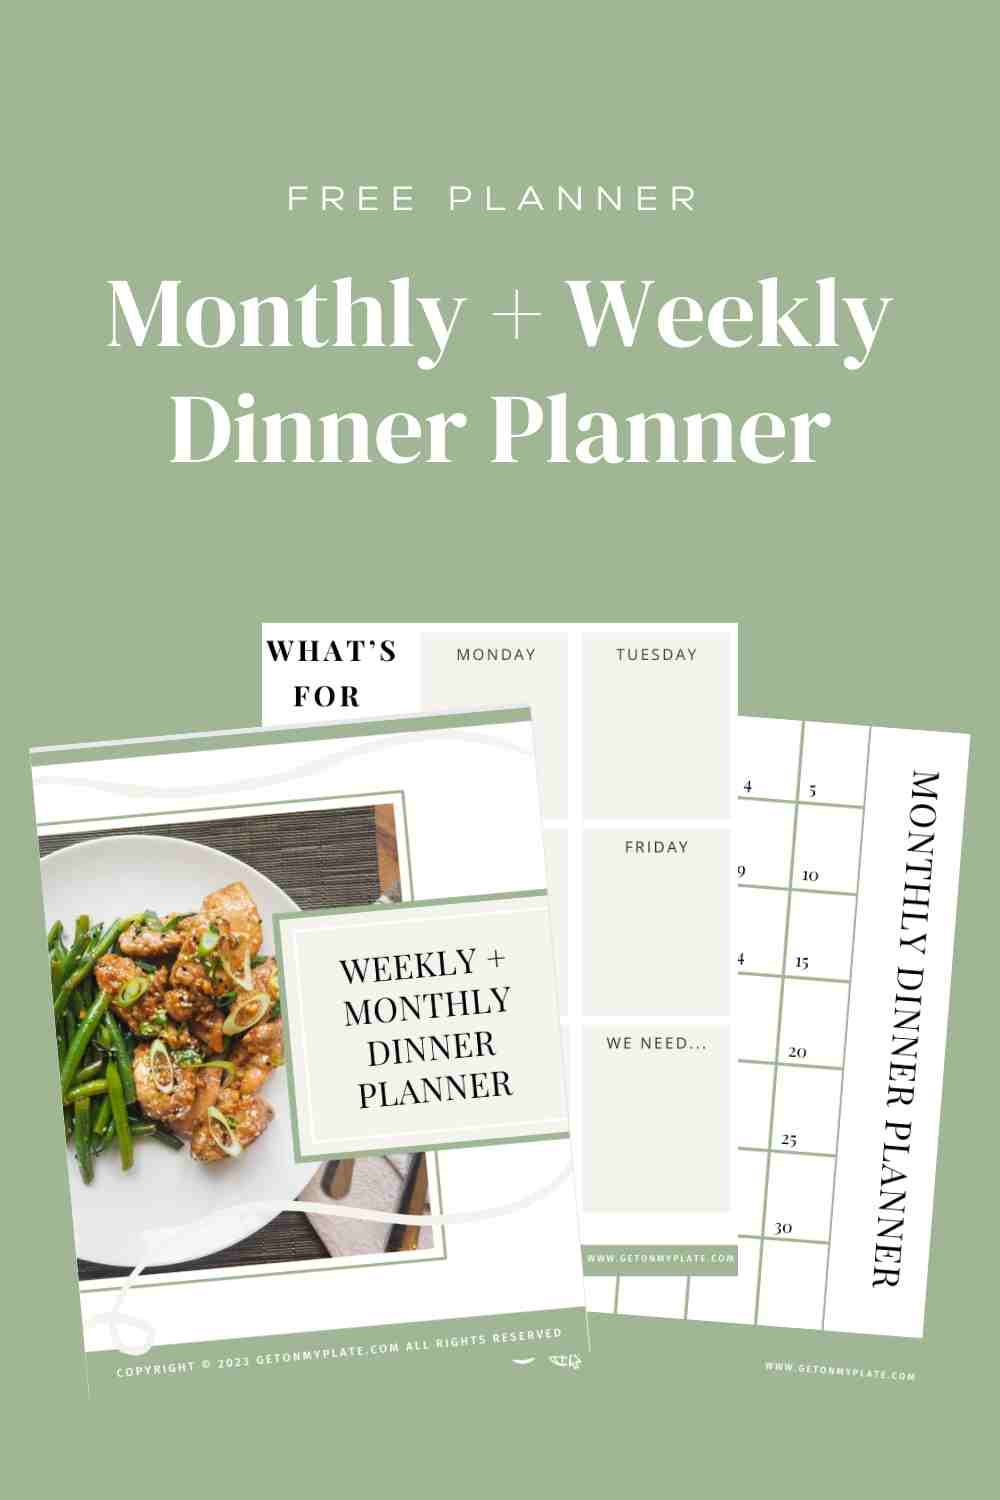 Screenshots for weekly and monthly dinner planner printable.